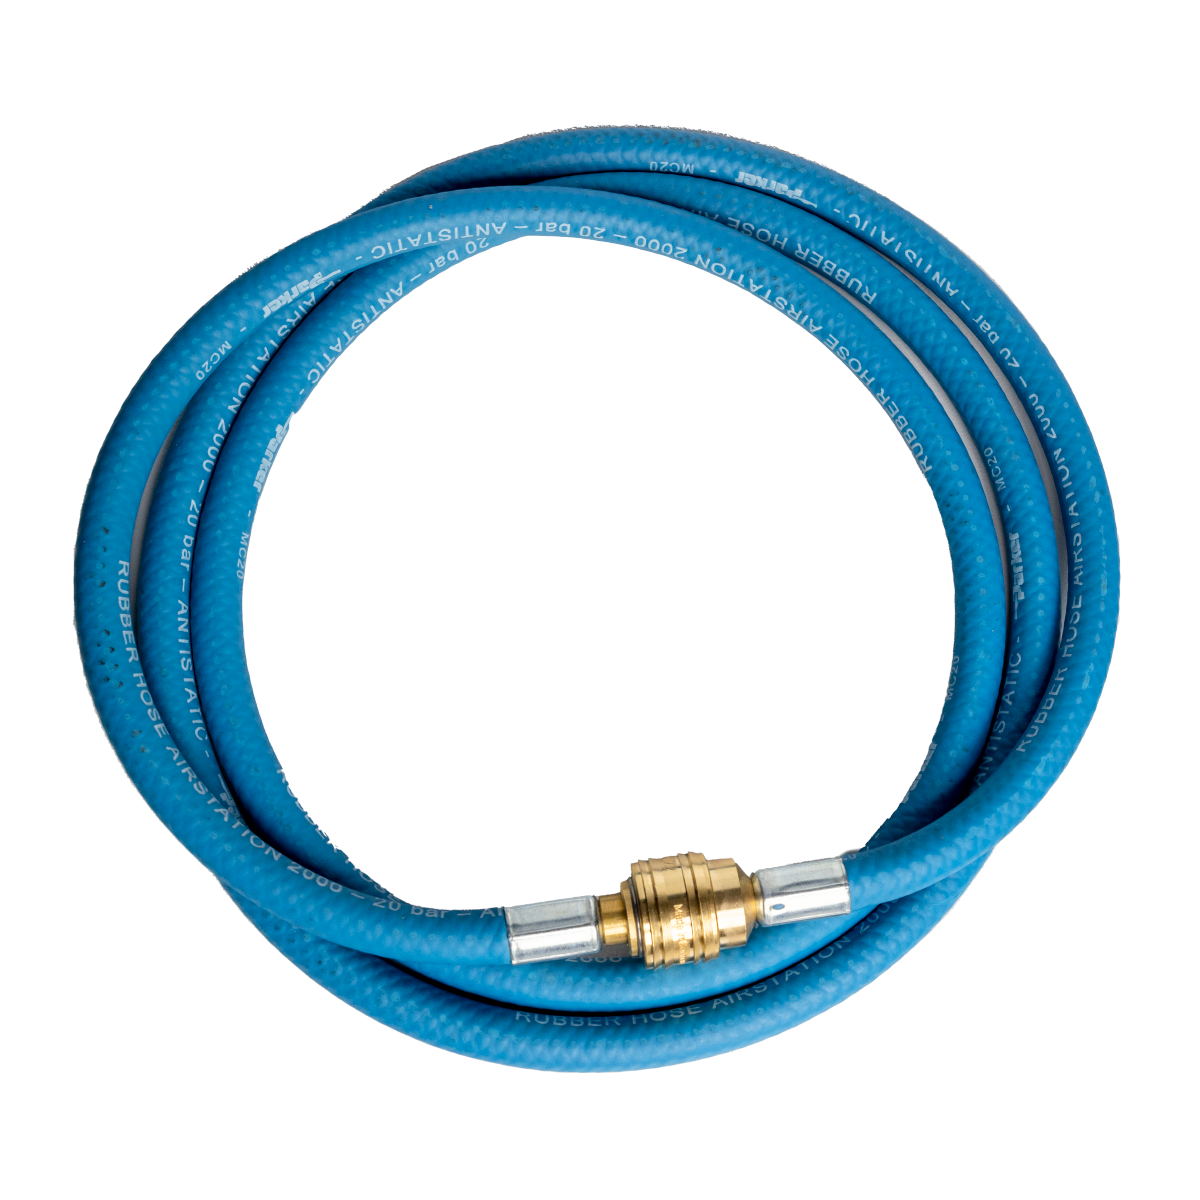 2m compressed air hose booster | Antistatic drive hose With NW 7.2 coupling and NW 7.2 plug